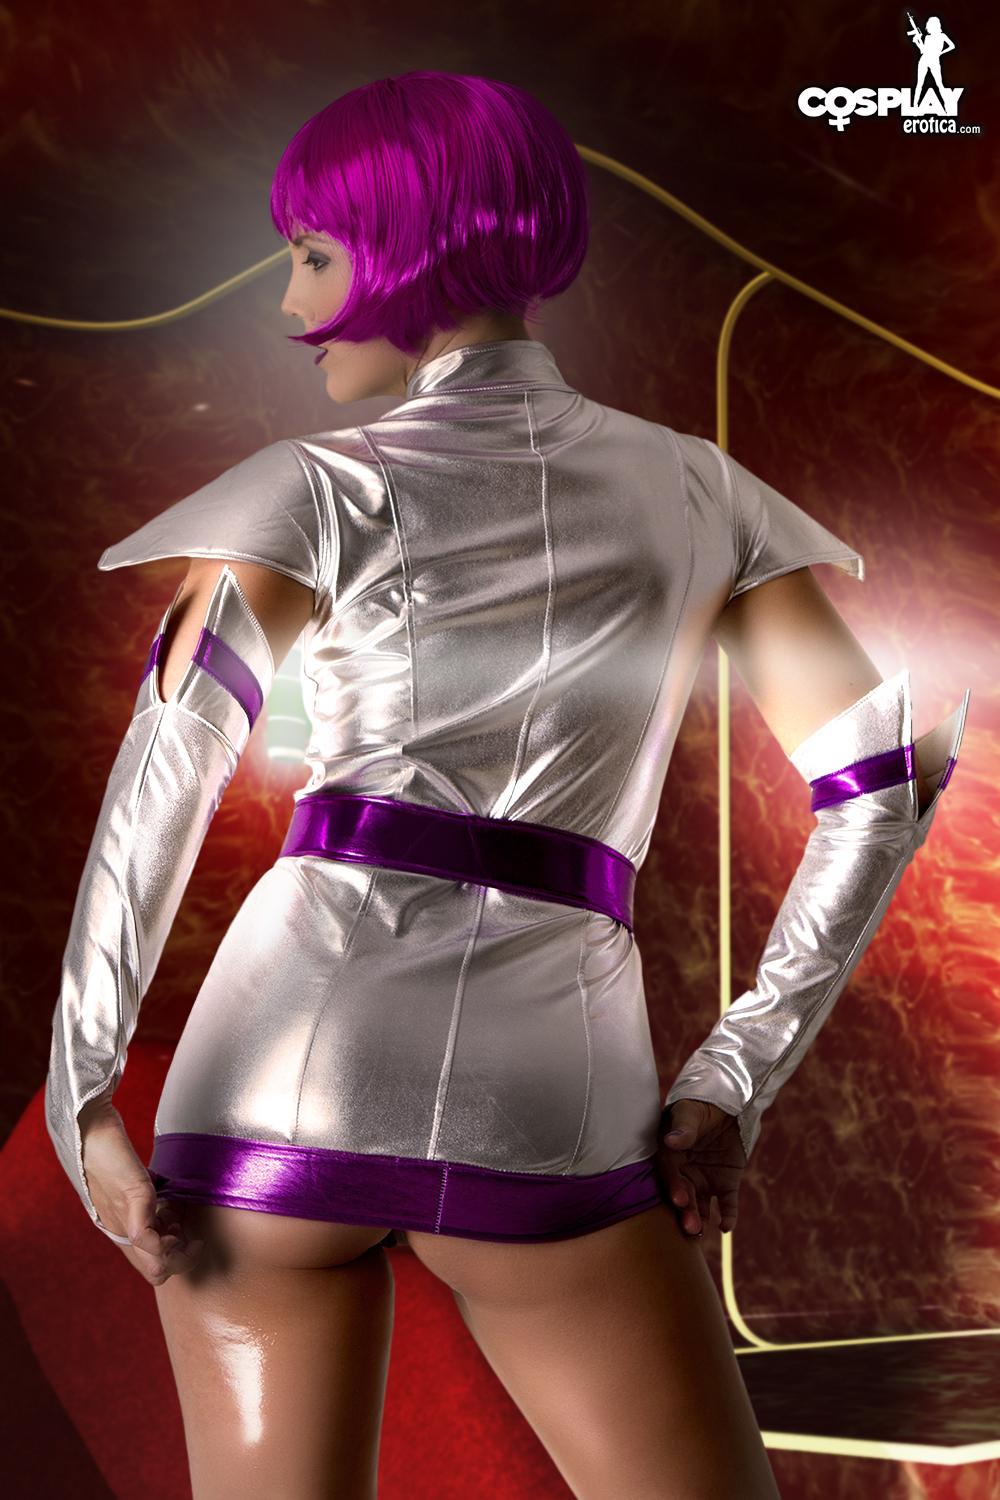 Cosplay hottie gogo expose son corps chaud dans le costume
 #54560116